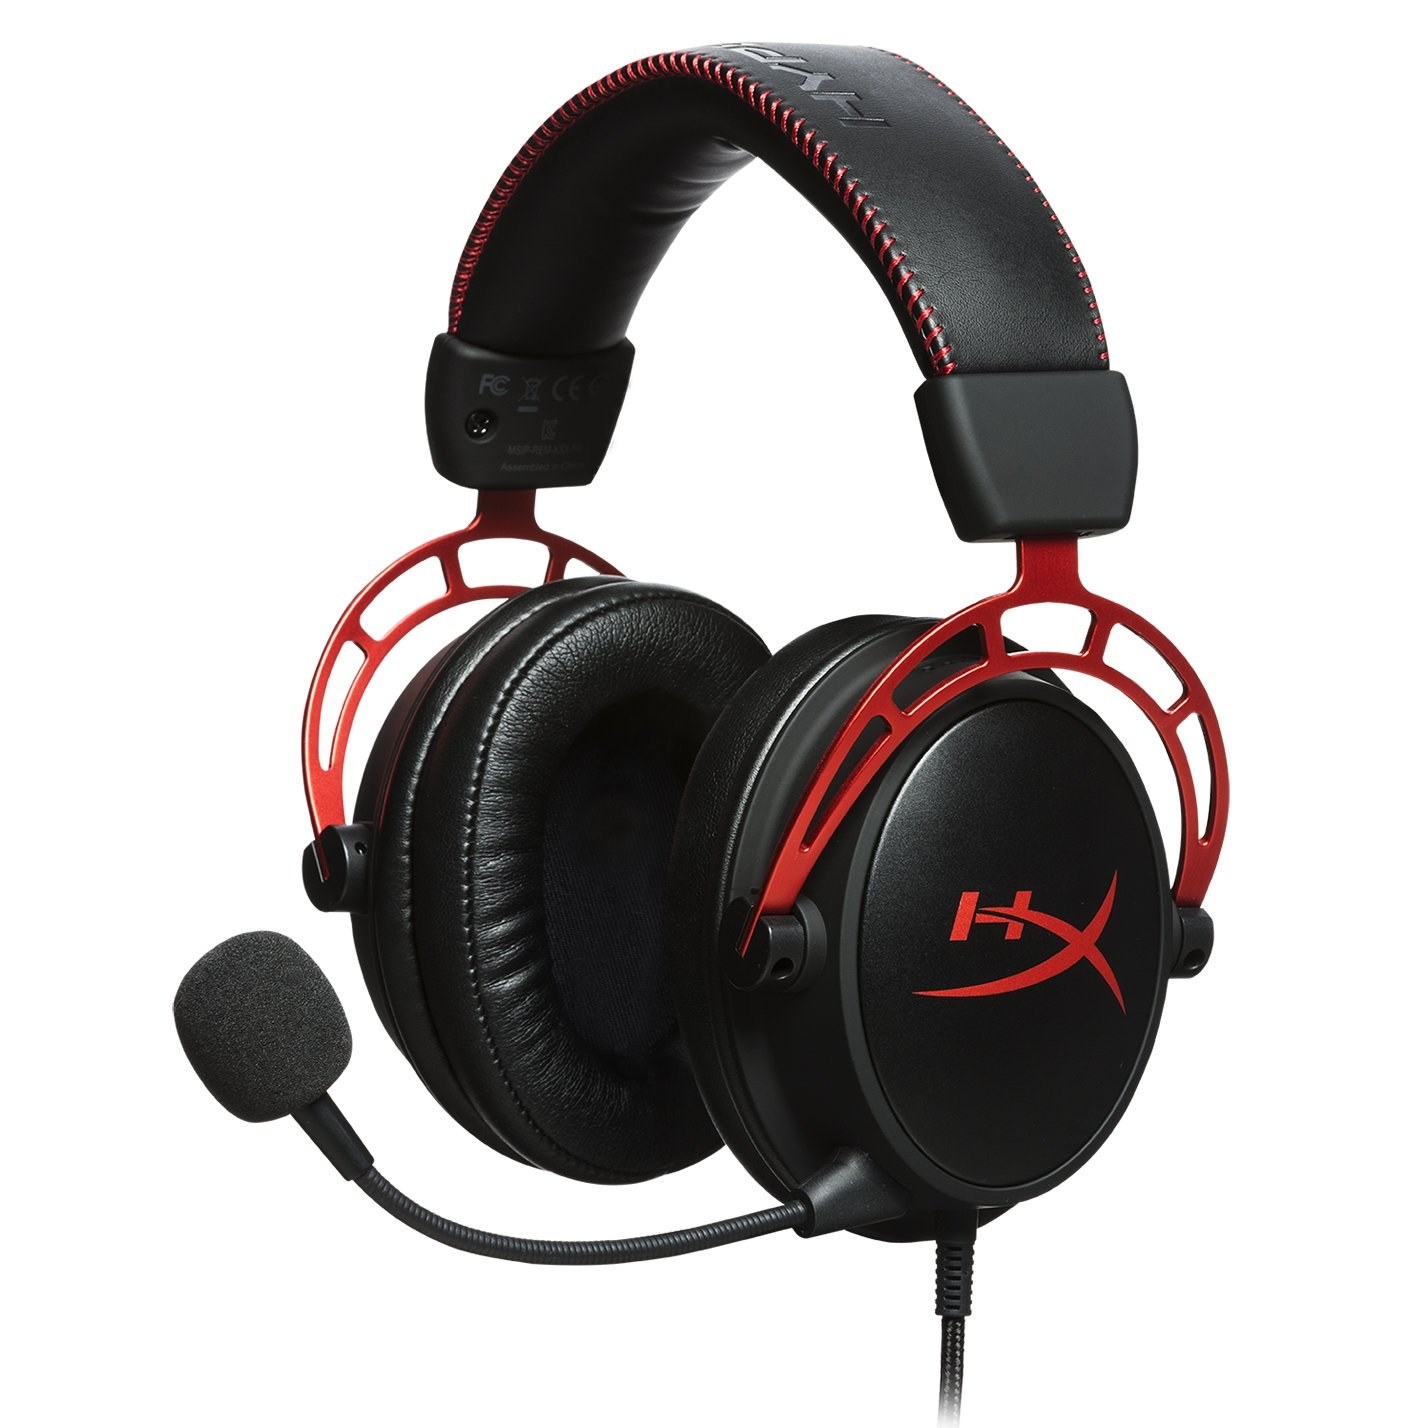 the black and red gaming headset